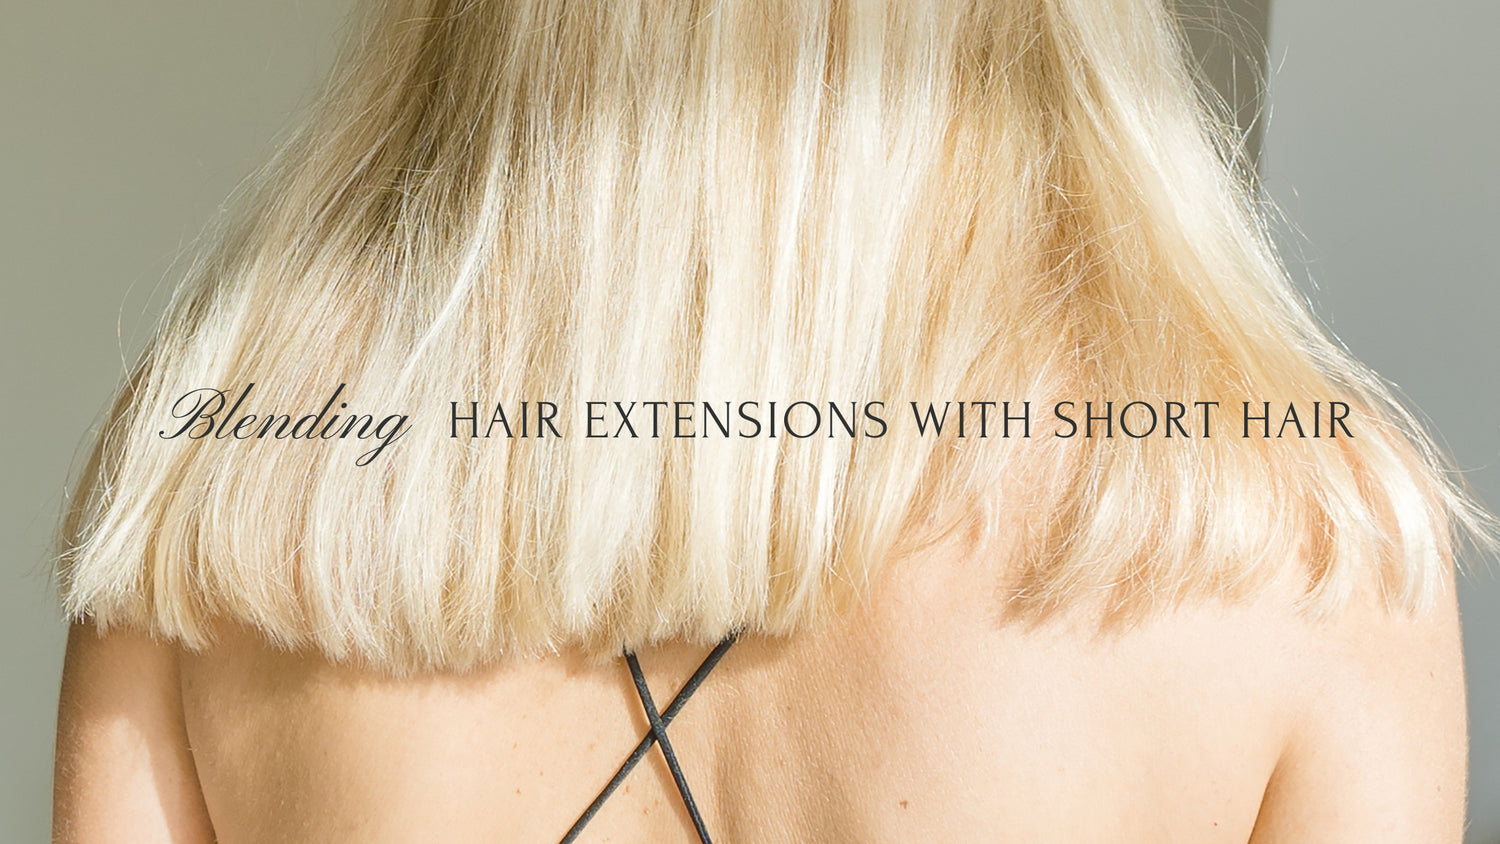 Frontrow blog banner for the topic: blending clip in hair extensions with short or blunt cut hair